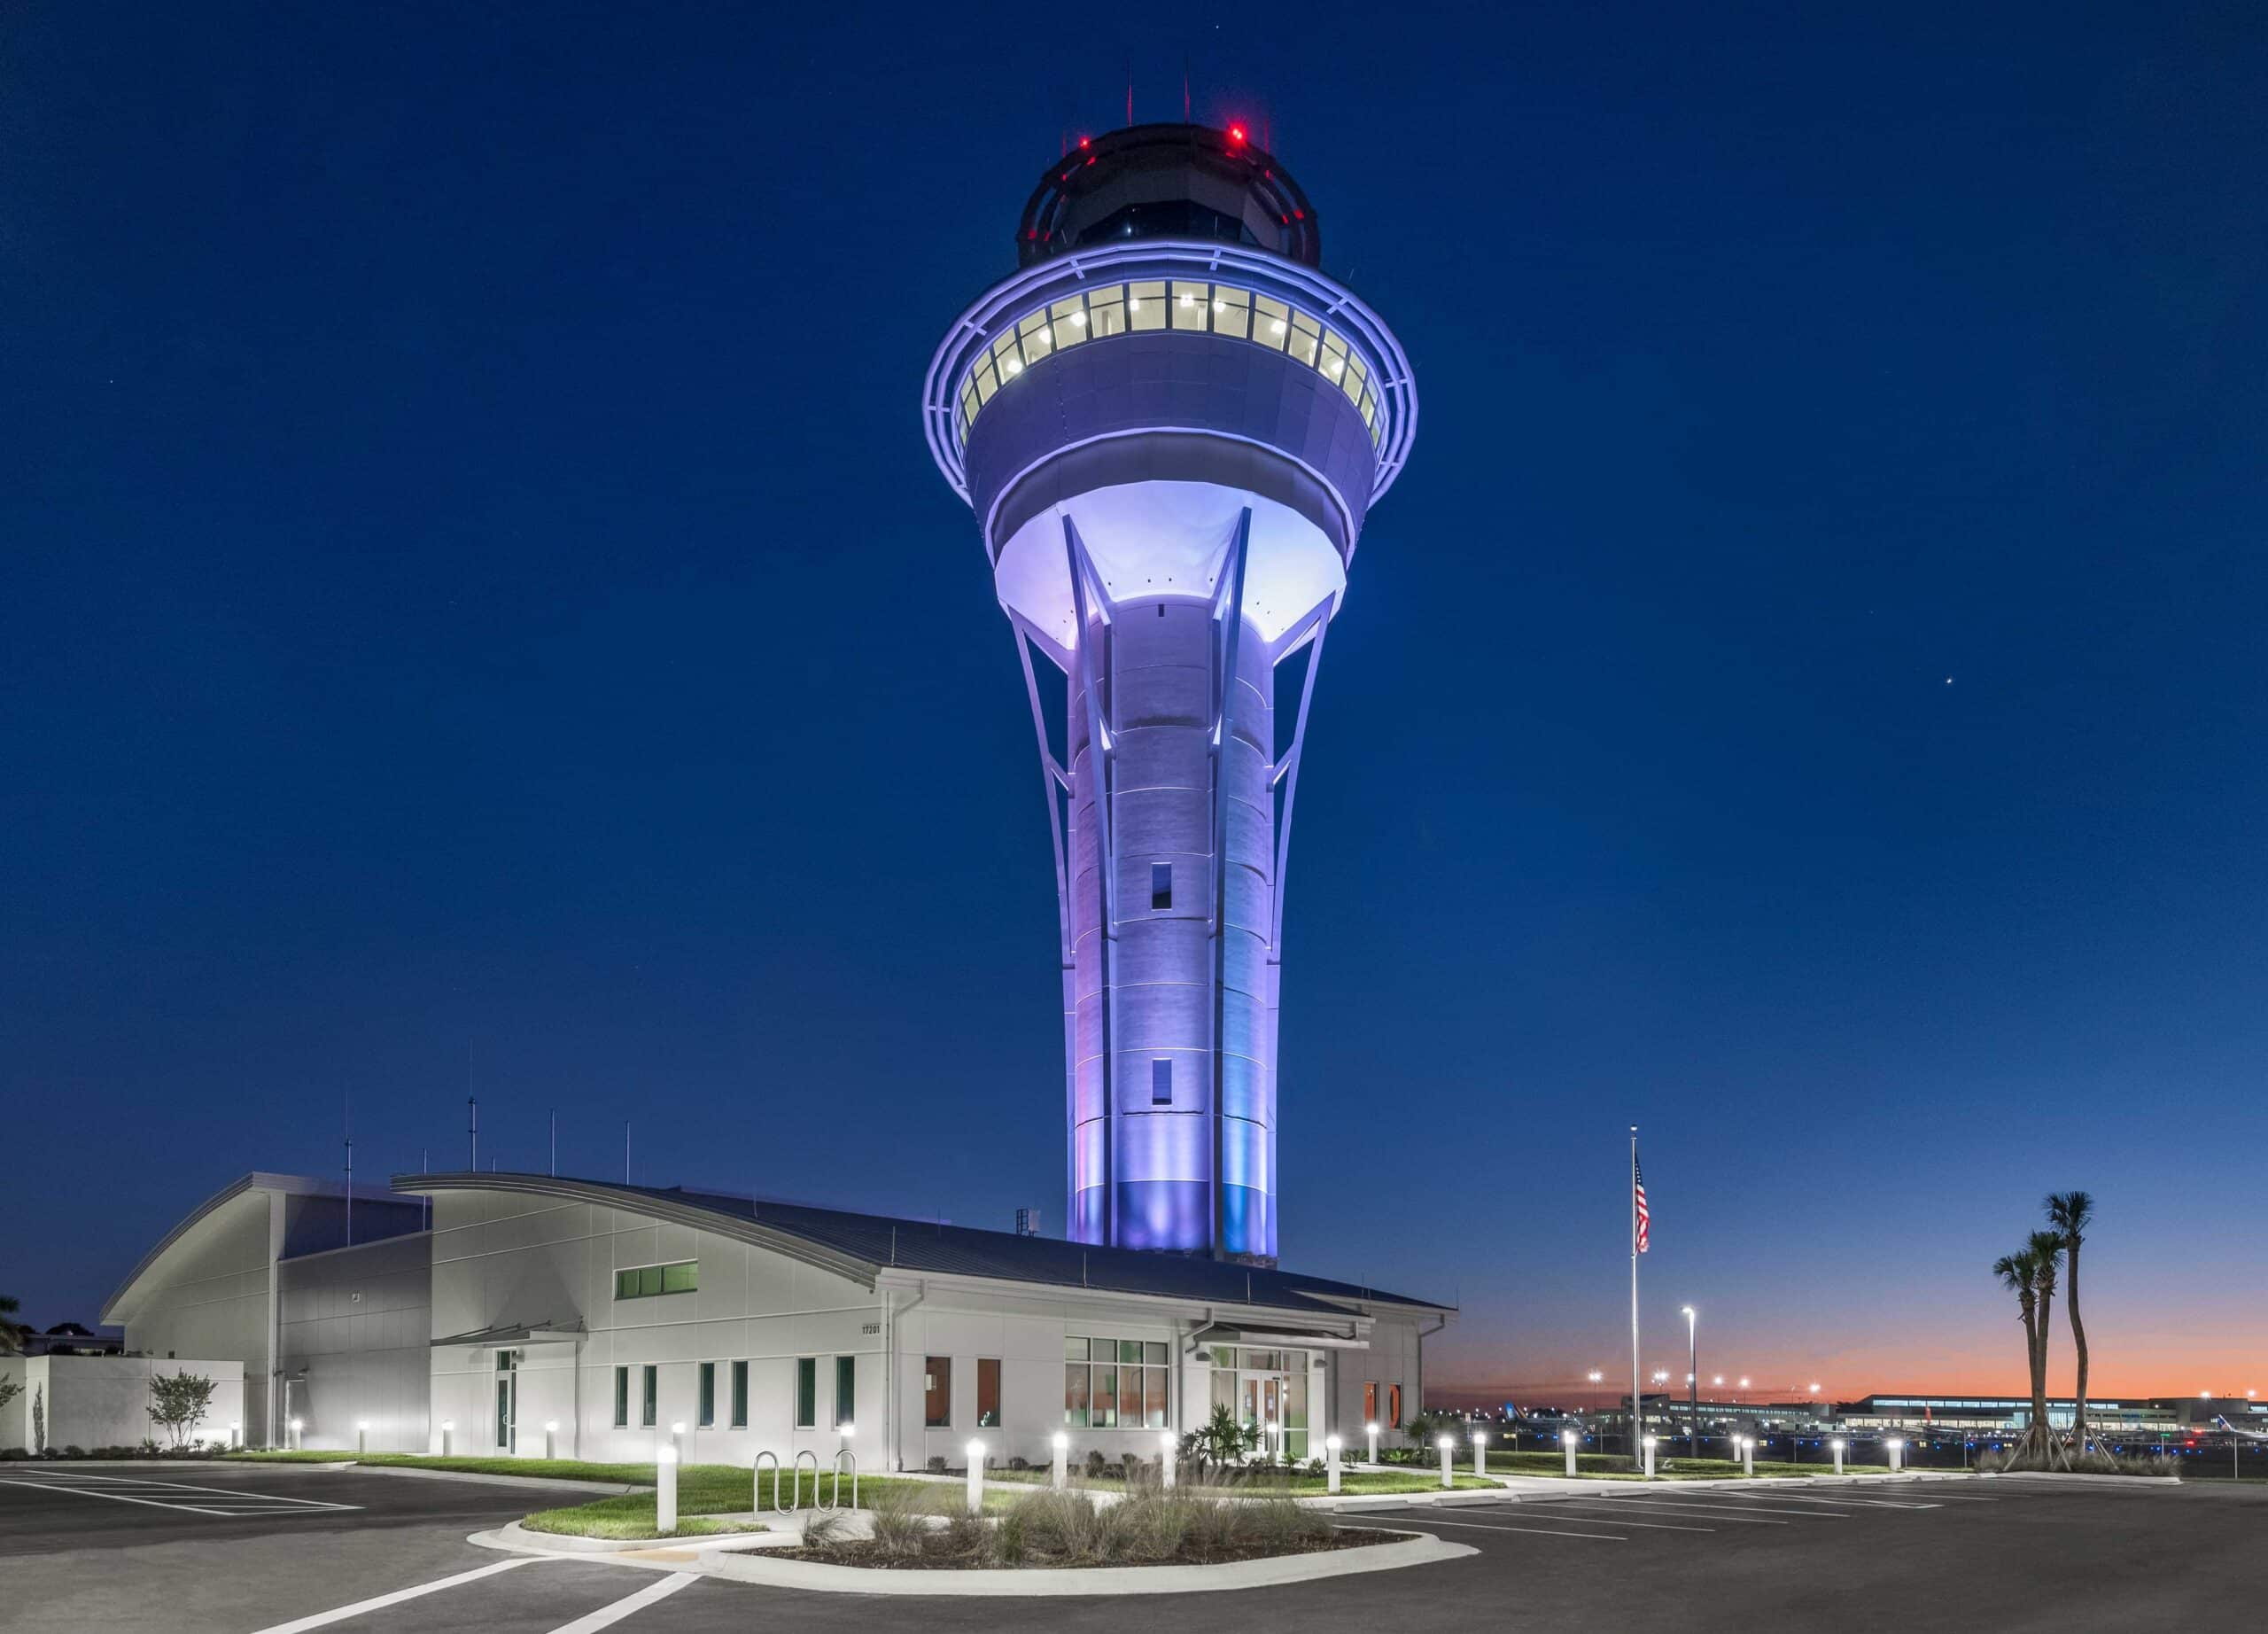 RSW Air Traffic Control Tower & TRACON Building